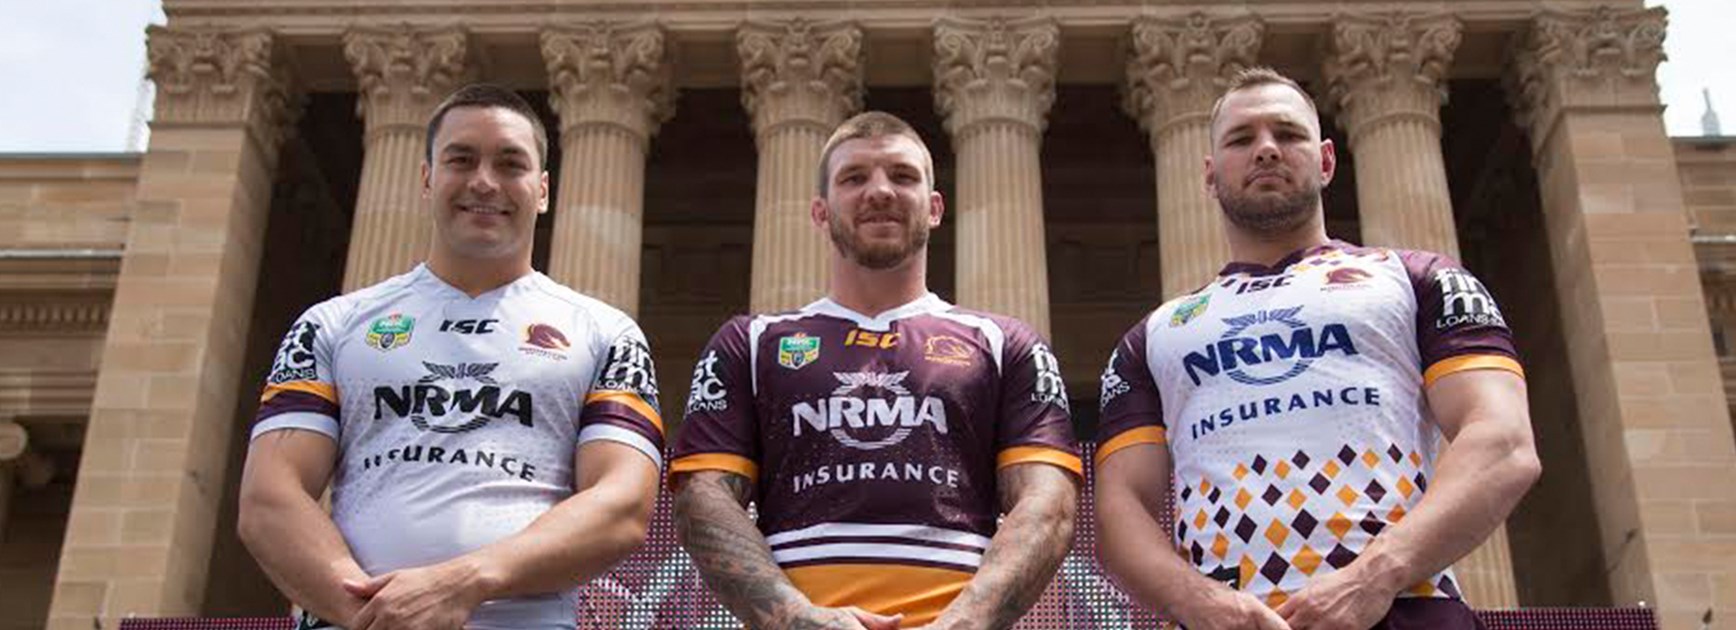 The Broncos have unveiled their new jerseys for the 2017 season.